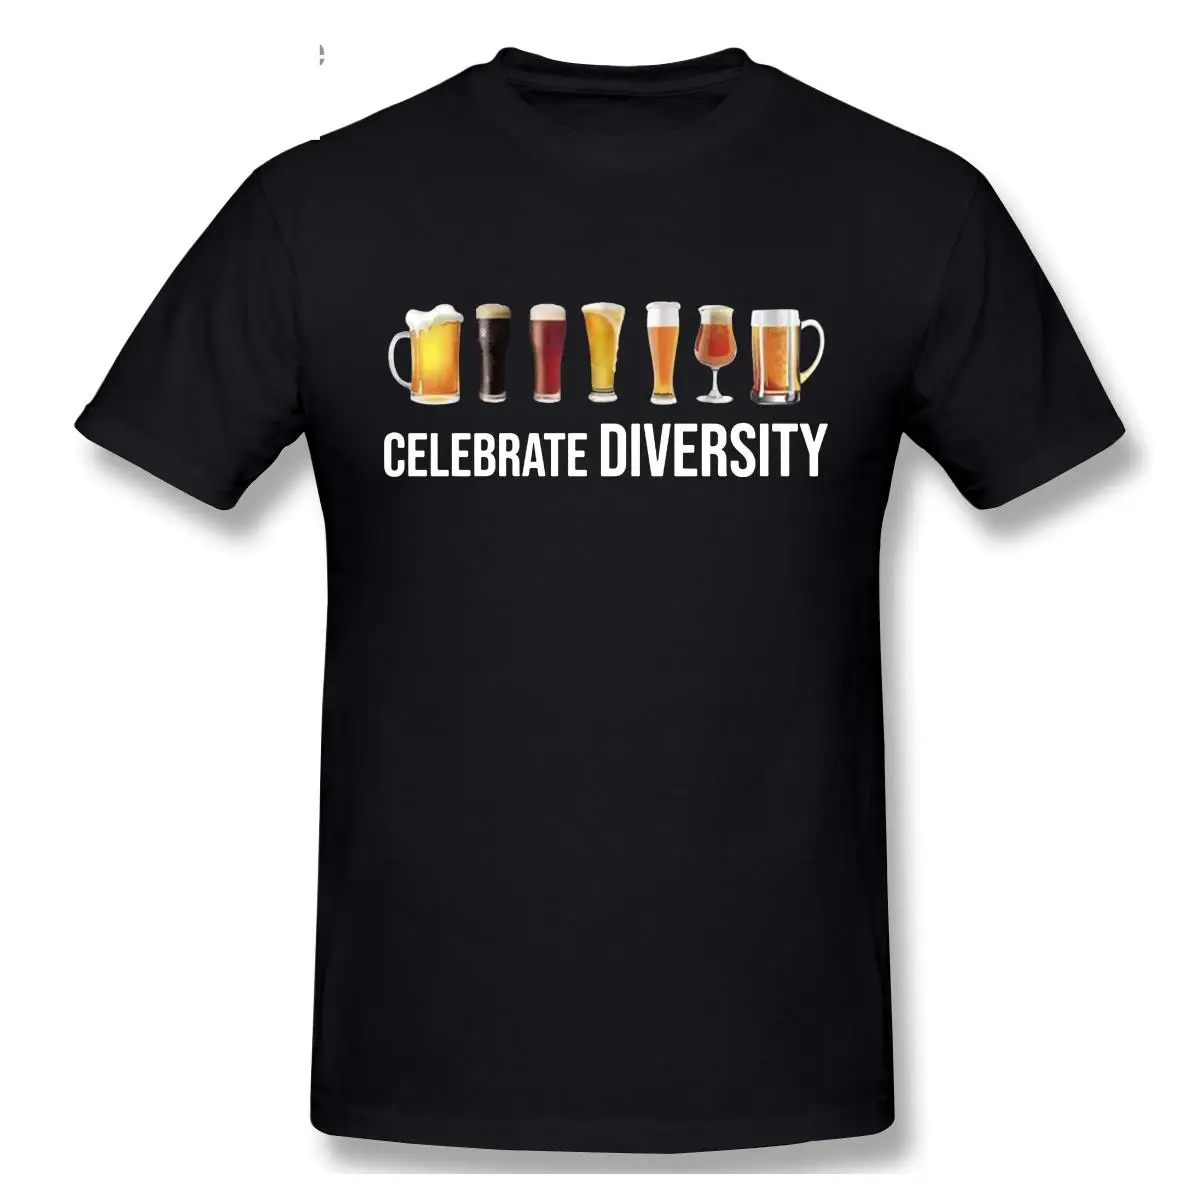 

Celebrate Diversity Beer Wine Beer Drinking Funny College Humor Mens New TShirt Men Fashion Cotton T-shirt